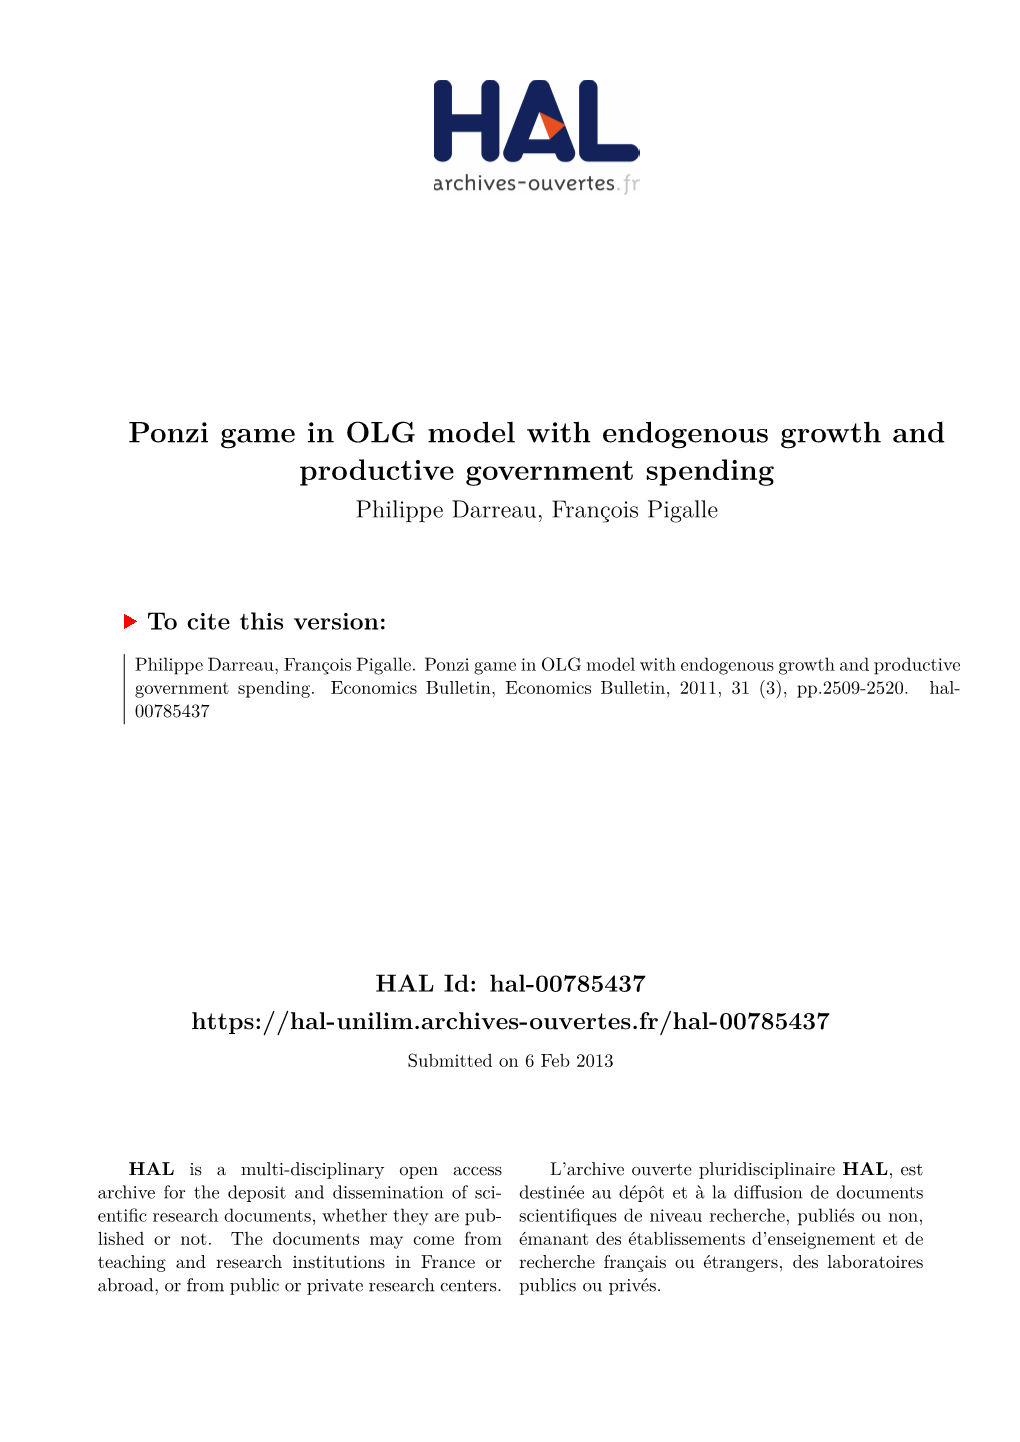 Ponzi Game in OLG Model with Endogenous Growth and Productive Government Spending Philippe Darreau, François Pigalle